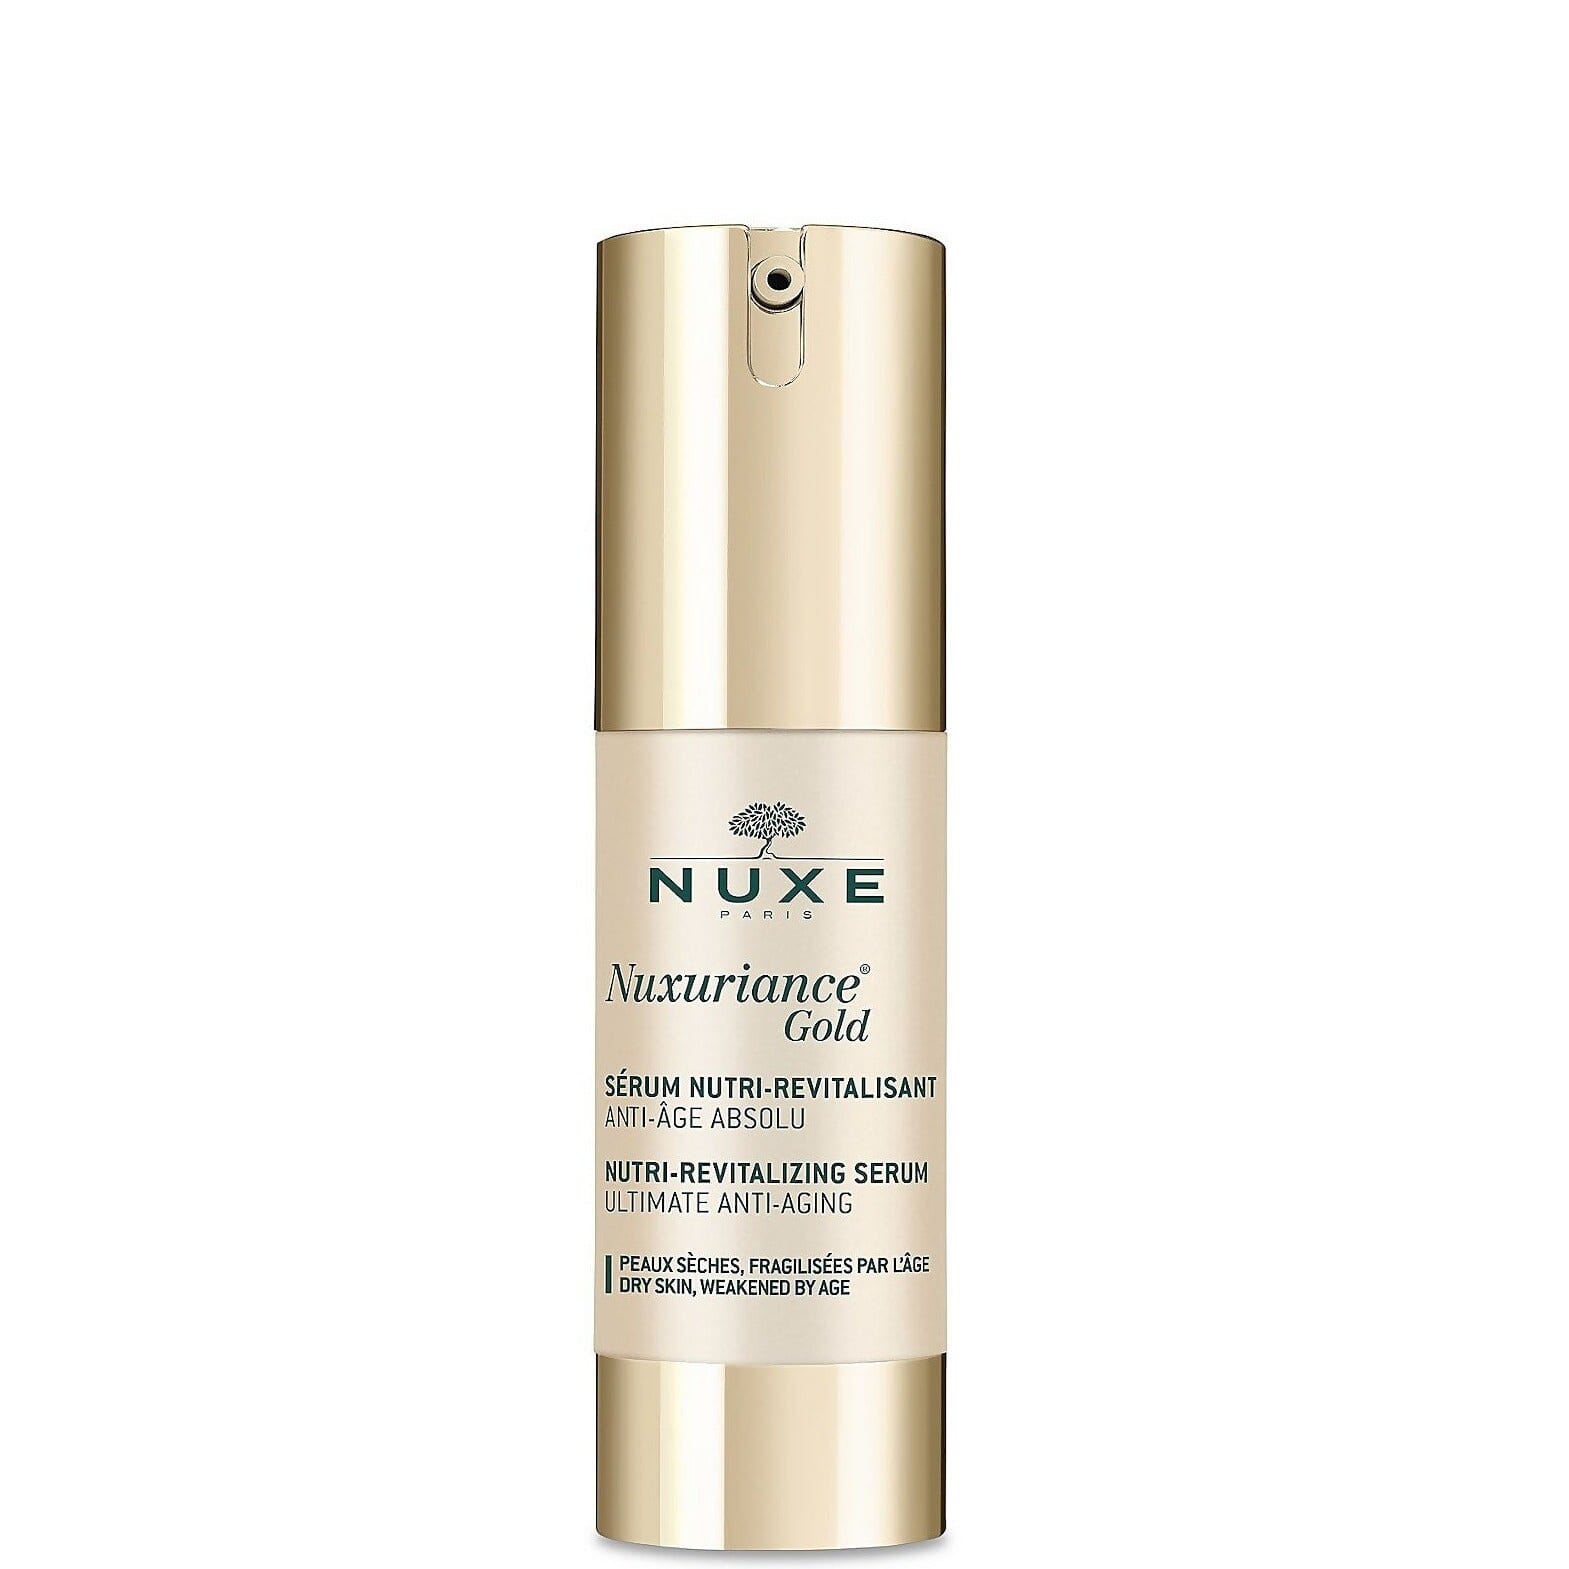 Nuxe Nuxuriance Gold Nutri-Replenishing Serum Nuxe 30 ml Shop at Exclusive Beauty Club